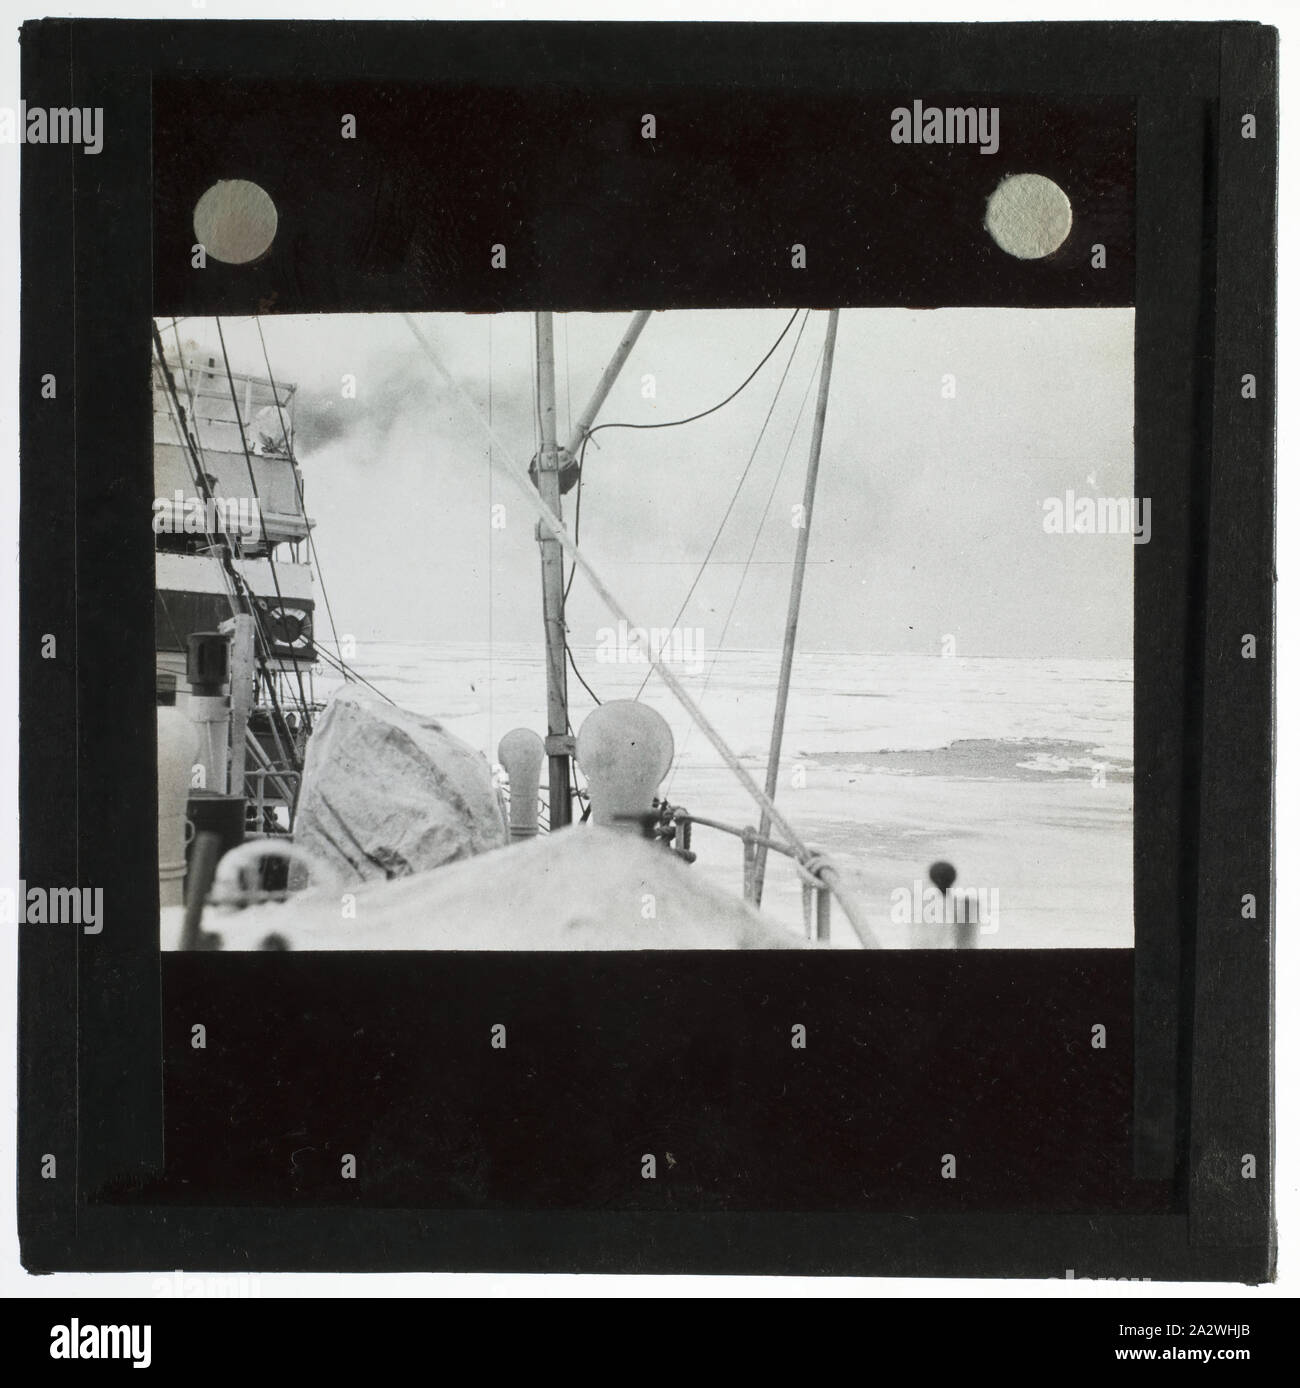 Lantern Slide - Discovery II in Heavy Pack Ice, Ross Sea, Ellsworth Relief Expedition, Antarctica, 1935-1936, Lantern slide of the ship Discovery II in pack ice, Antarctica. One of 328 images in various formats including artworks, photographs, glass negatives and lantern slides Stock Photo